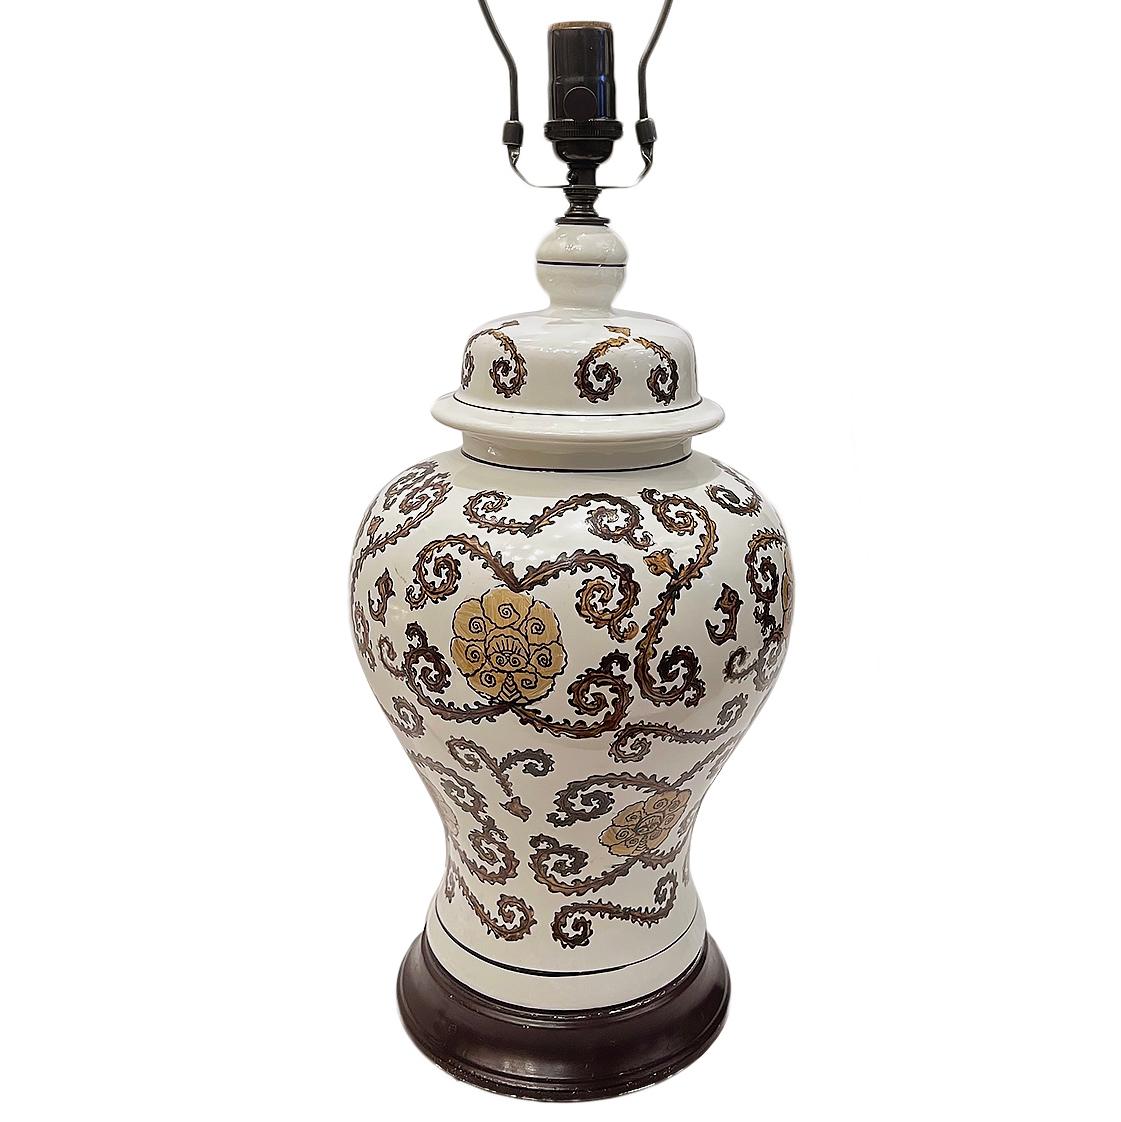 A circa 1960s Italian porcelain lamp with floral motif.

Measurements:
Height of body: 16